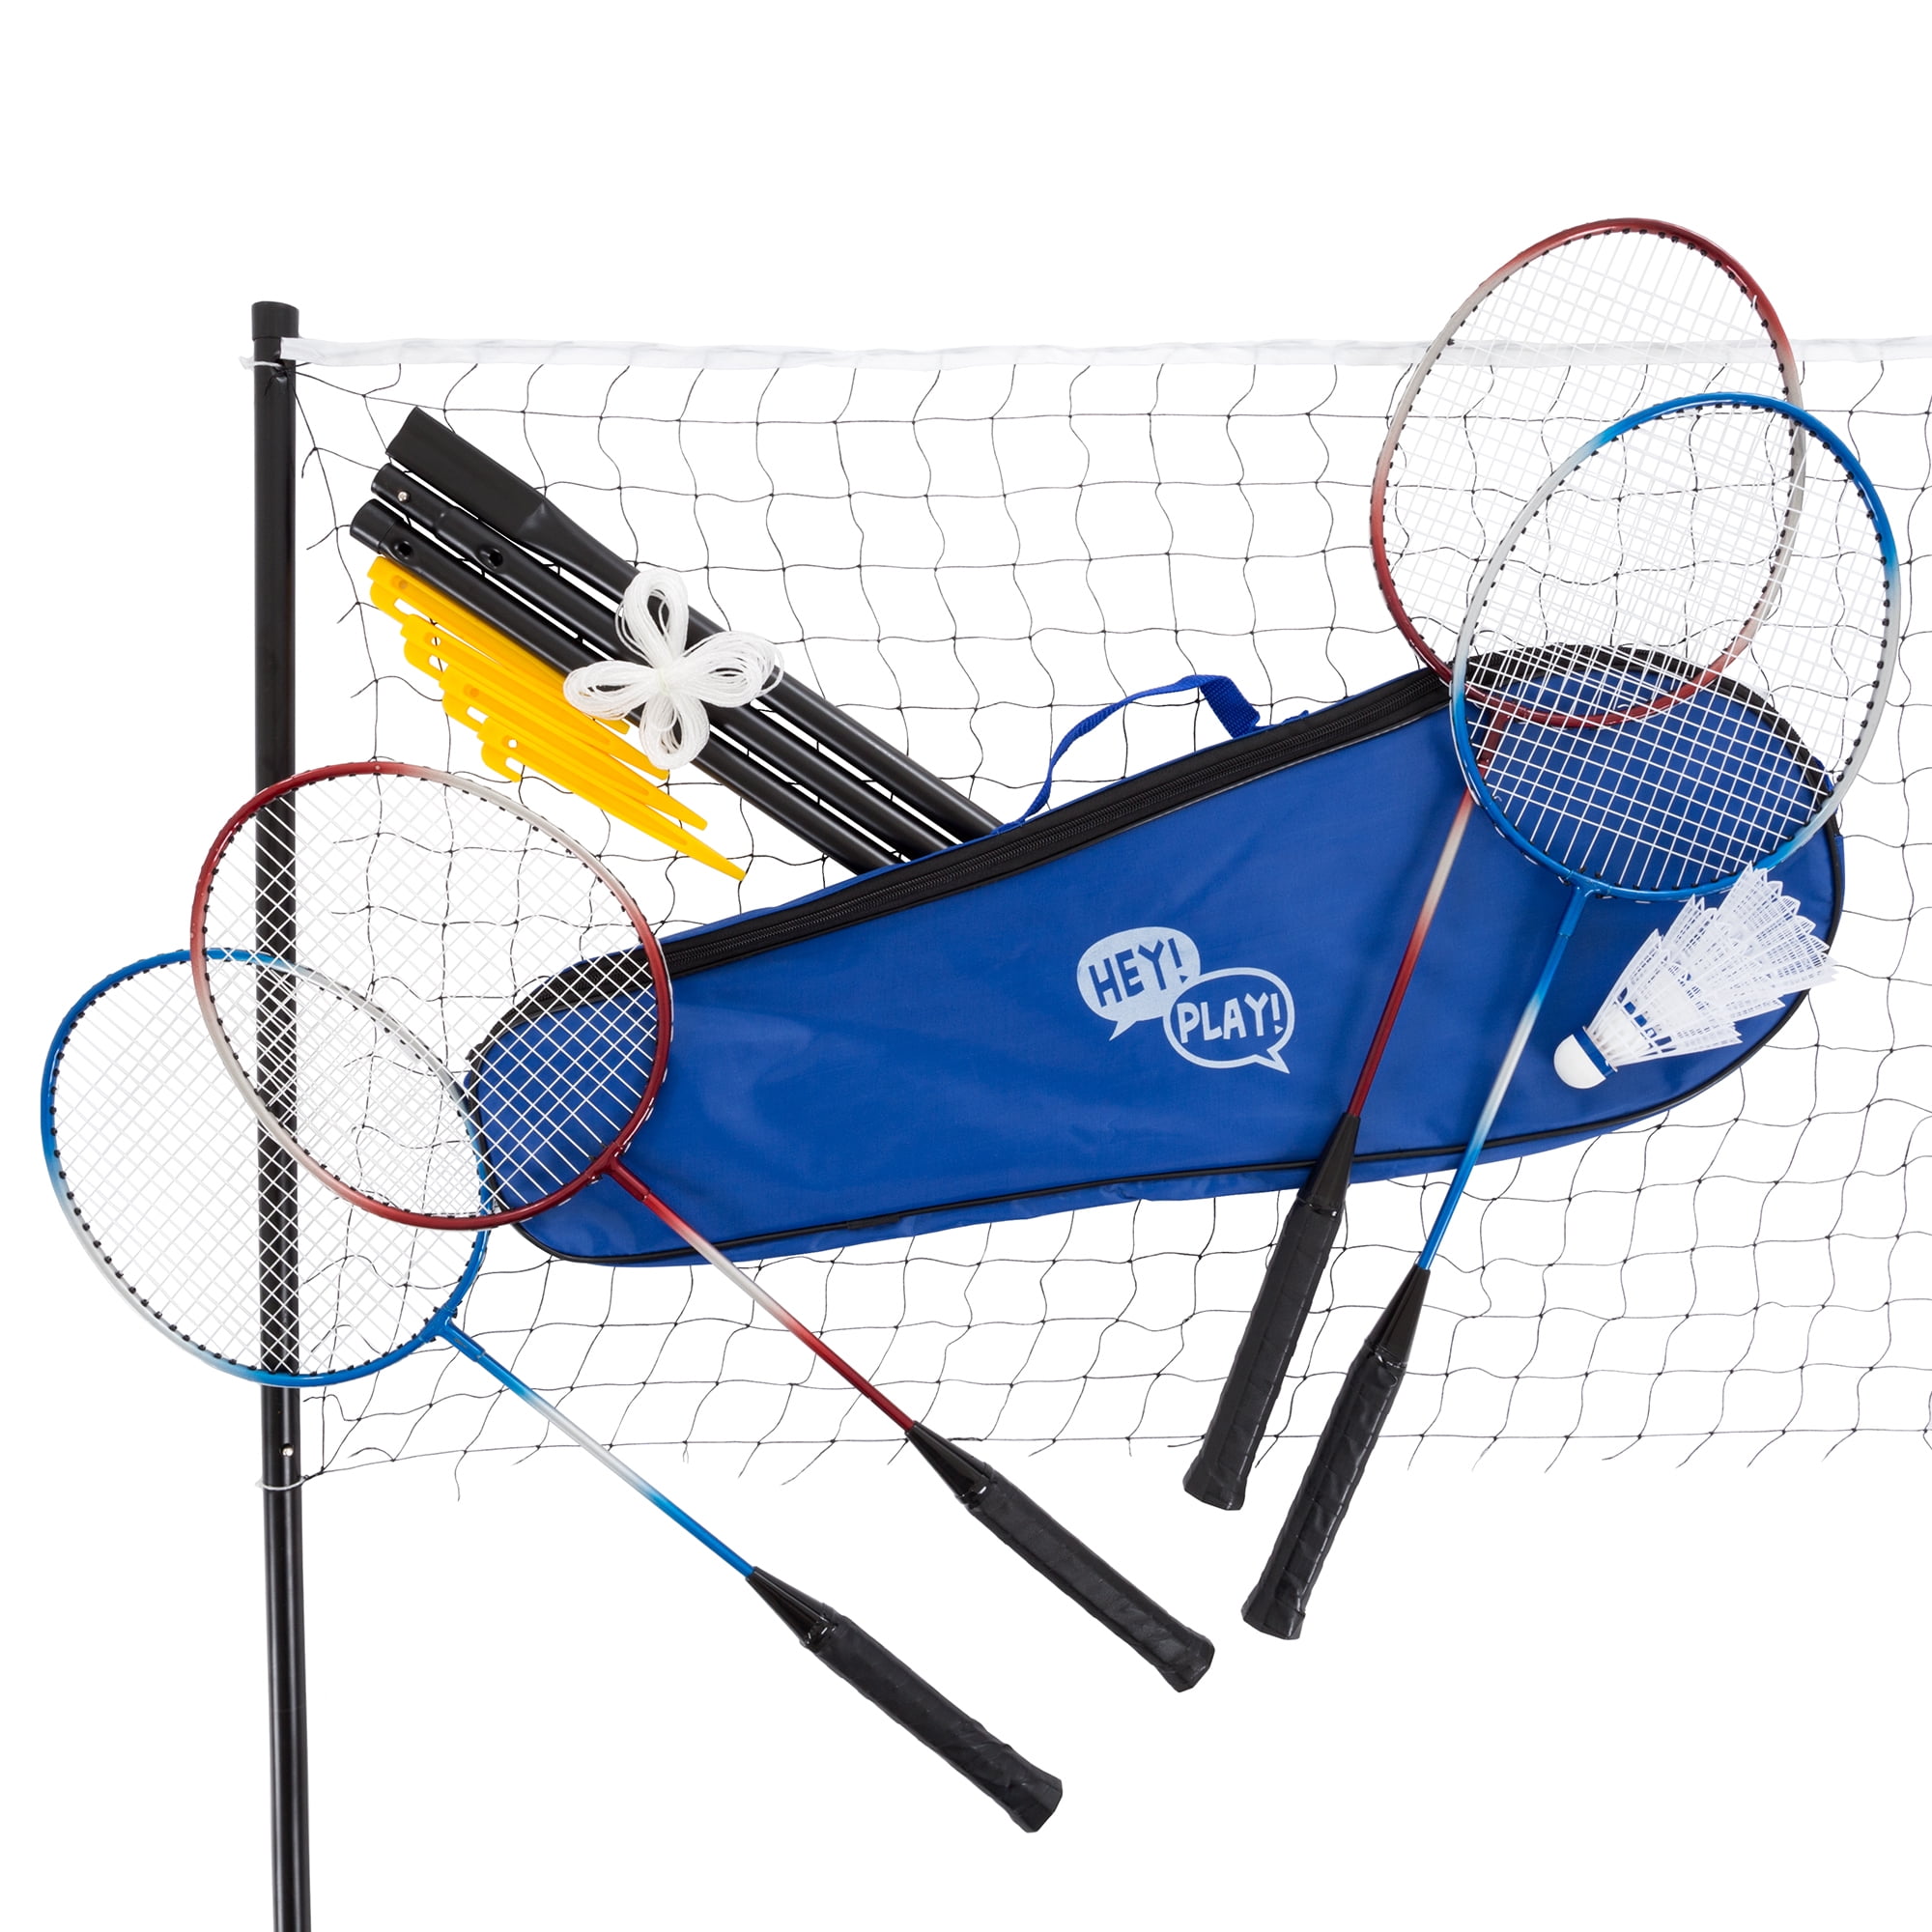 Hey Play All-in-One Portable Badminton Set with Rackets, Birdies, and Net